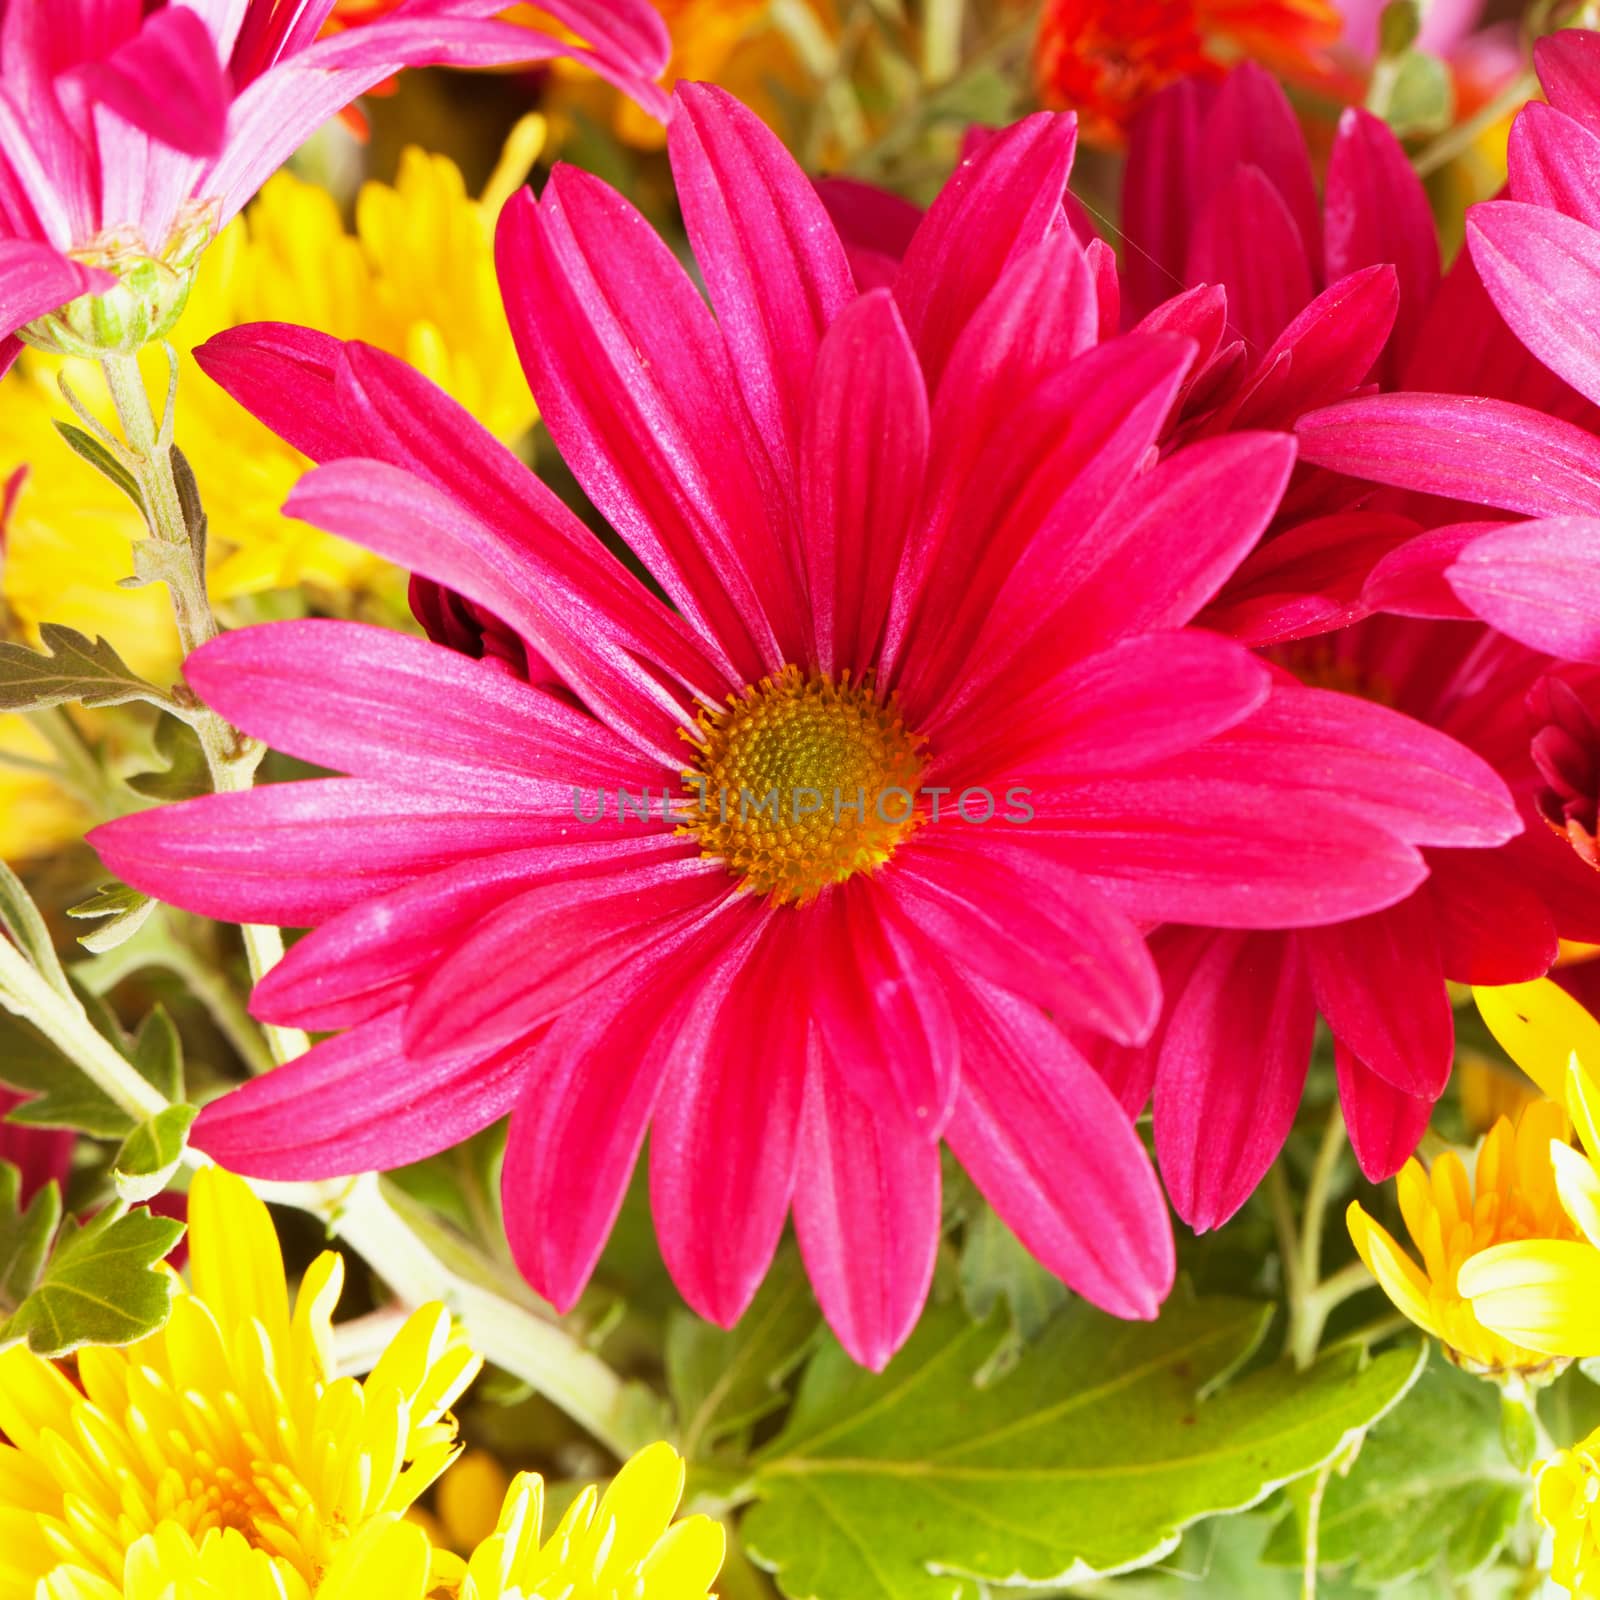 Red daisy in close up, square image